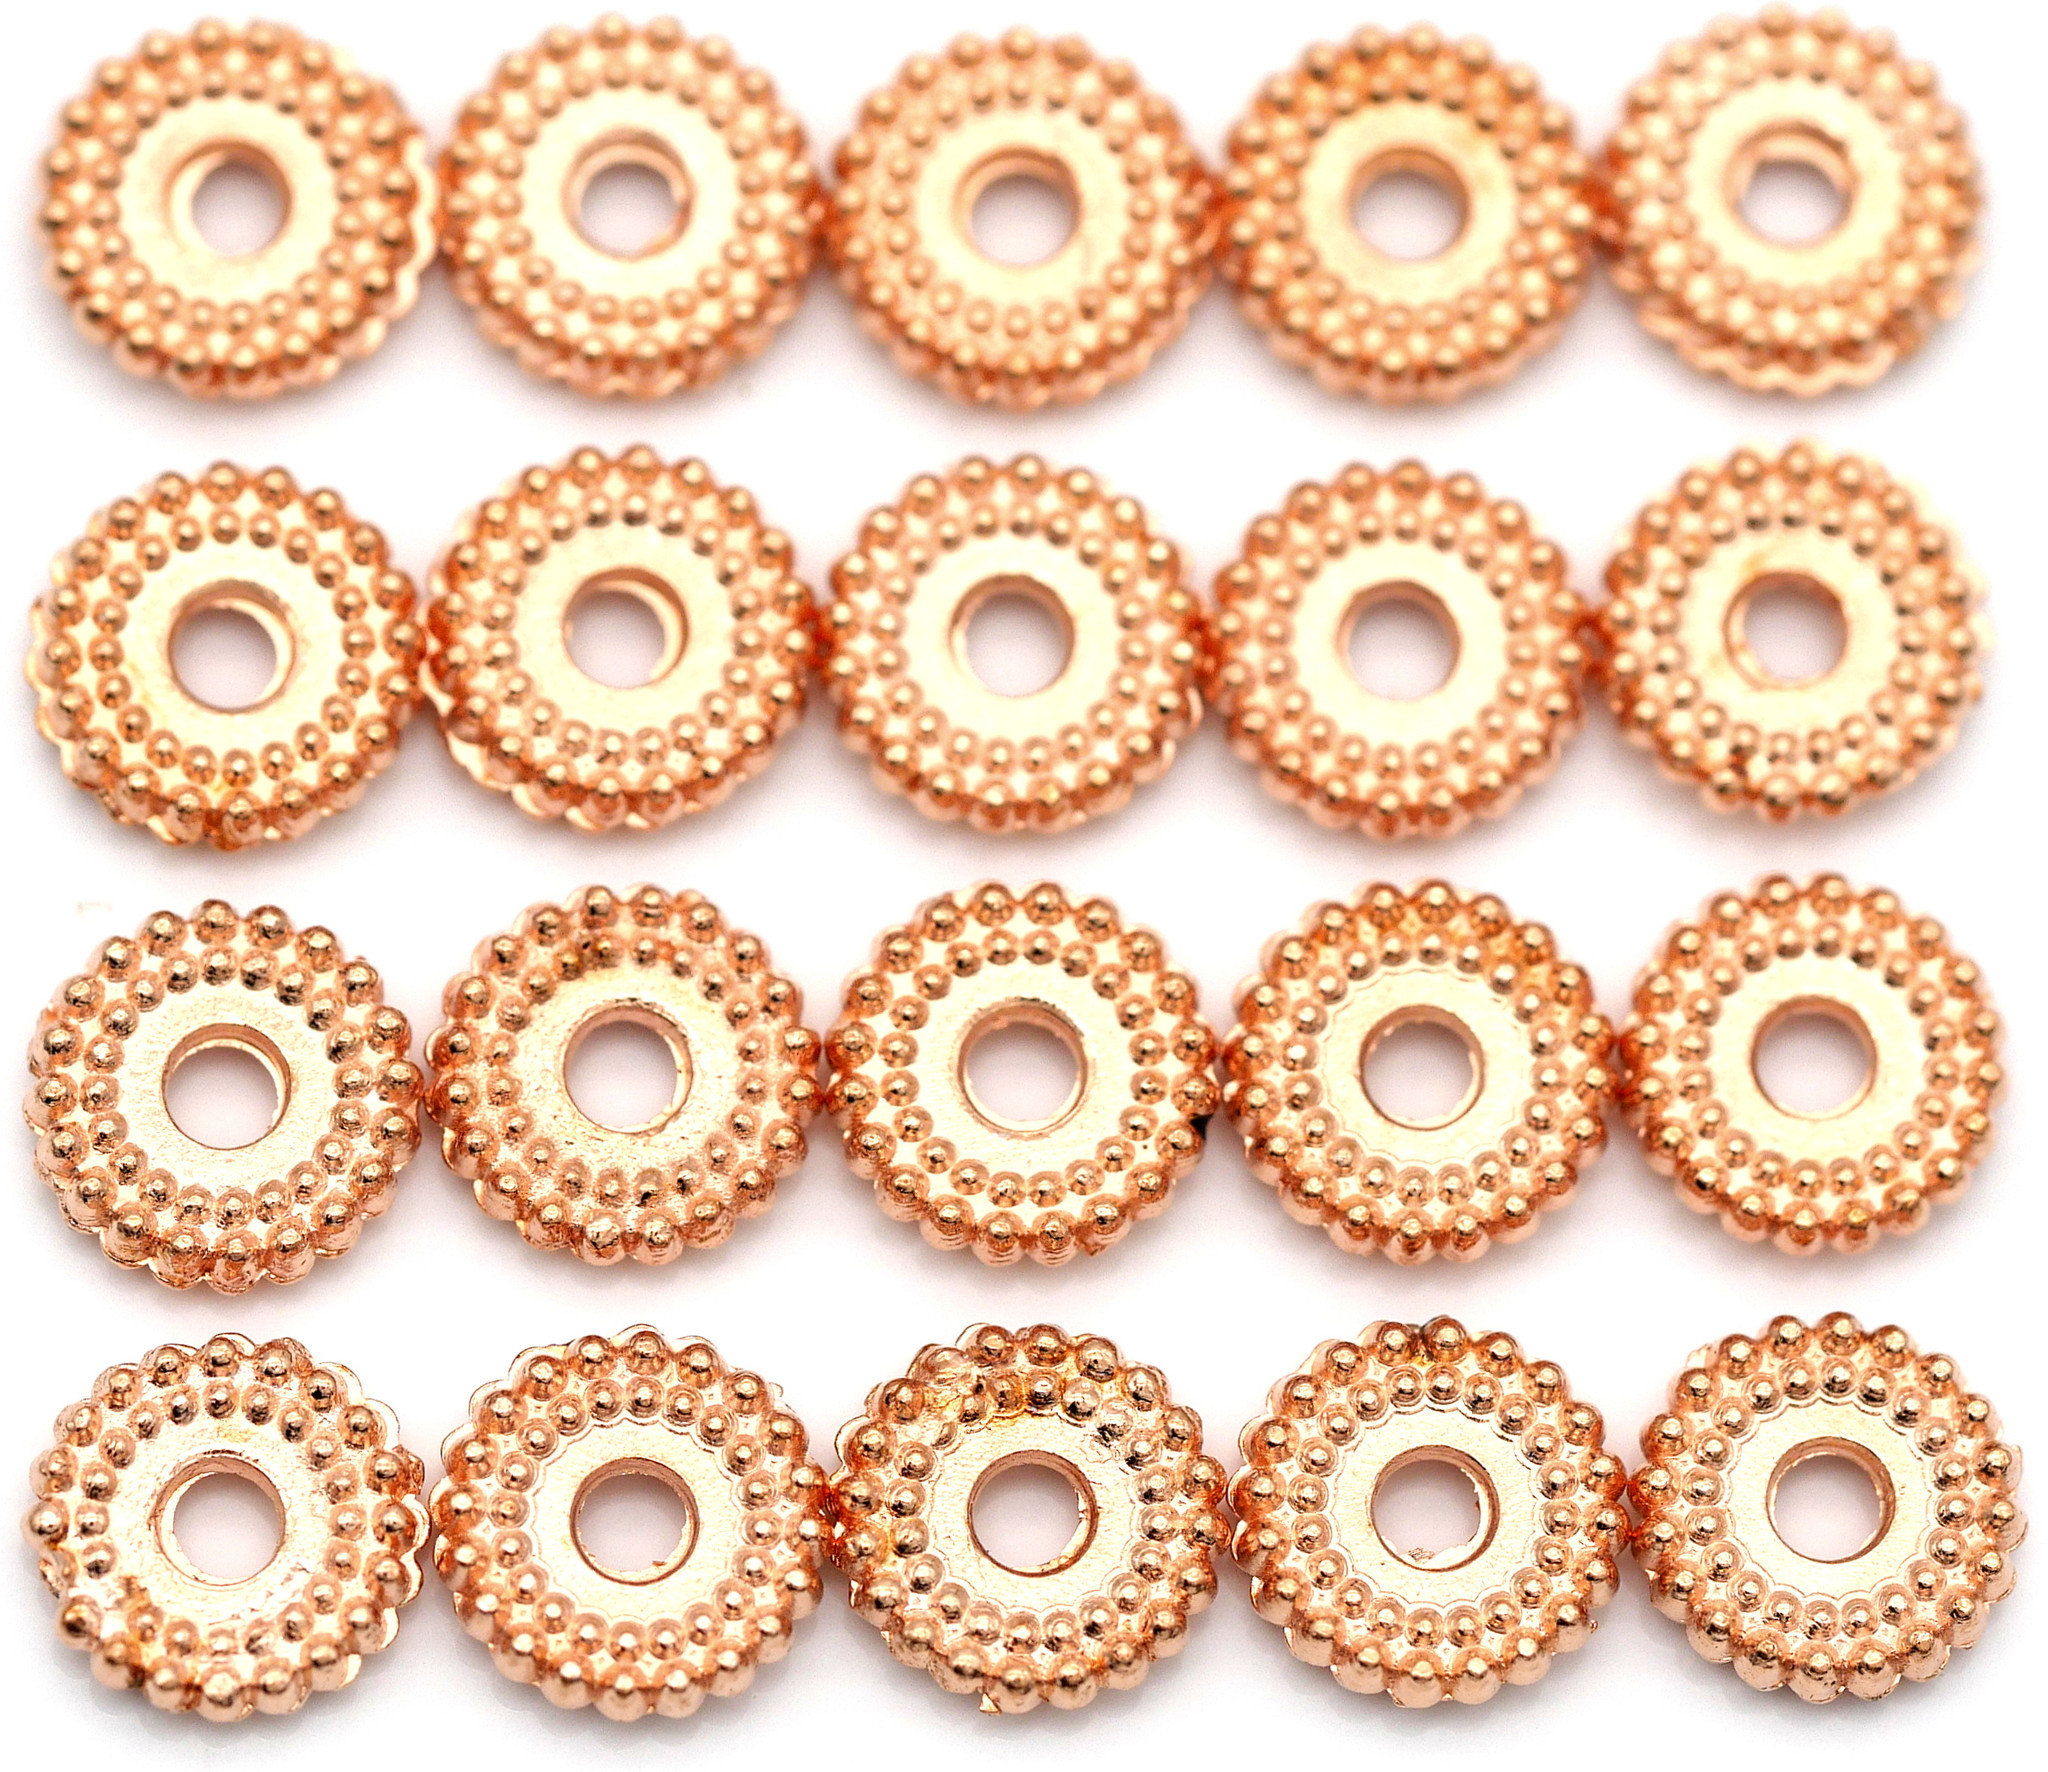 20pc 7x2mm Bumpy Rondelle Spacer Beads, Rose Gold - Bead Box Bargains